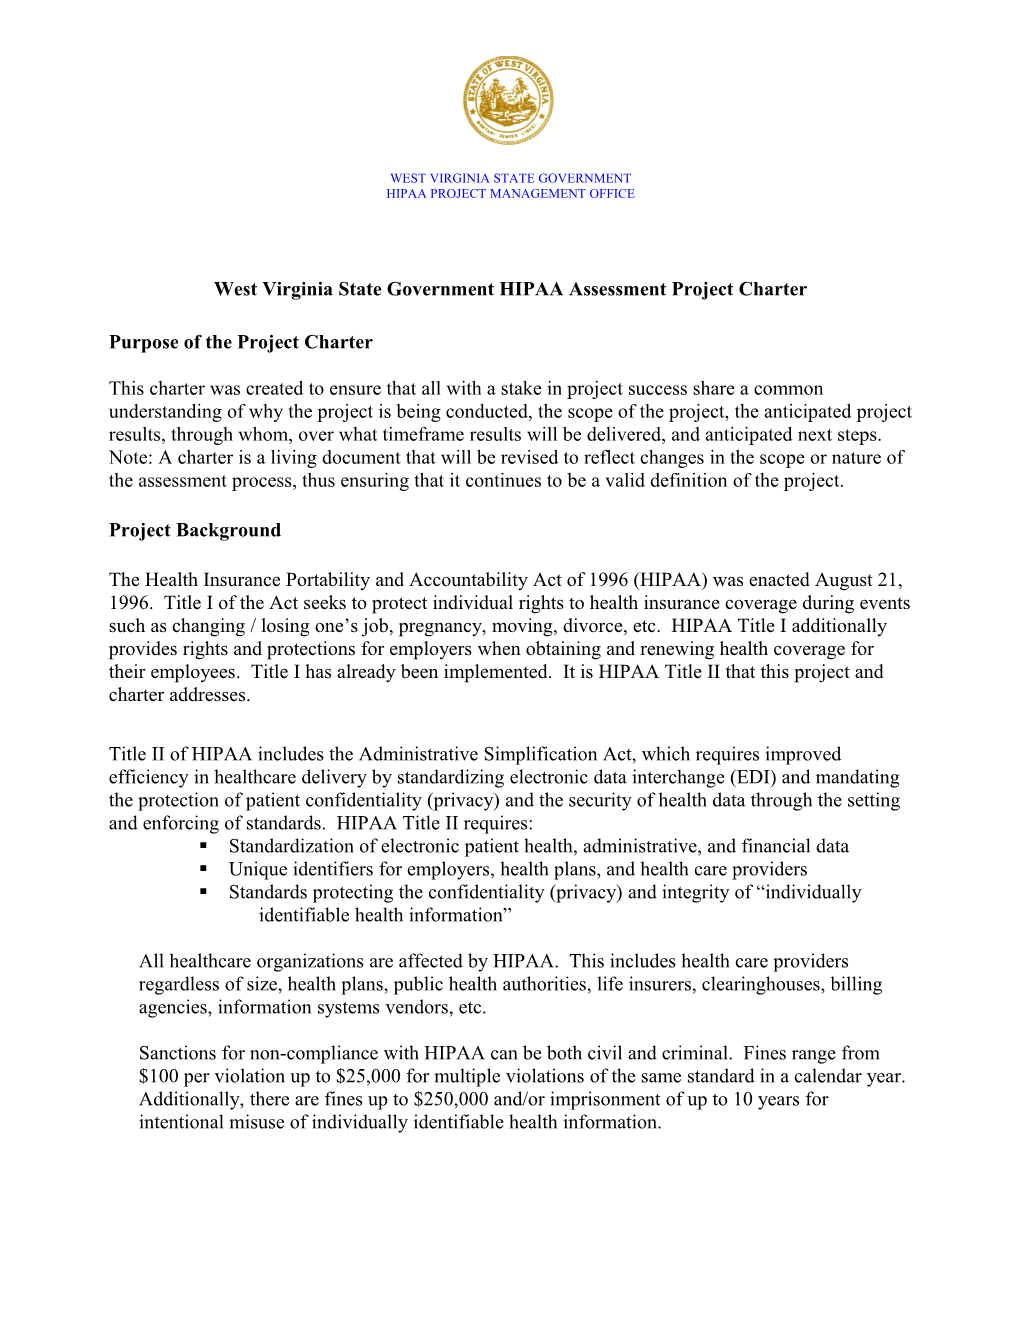 West Virginia State Government HIPAA Assessment Project Charter